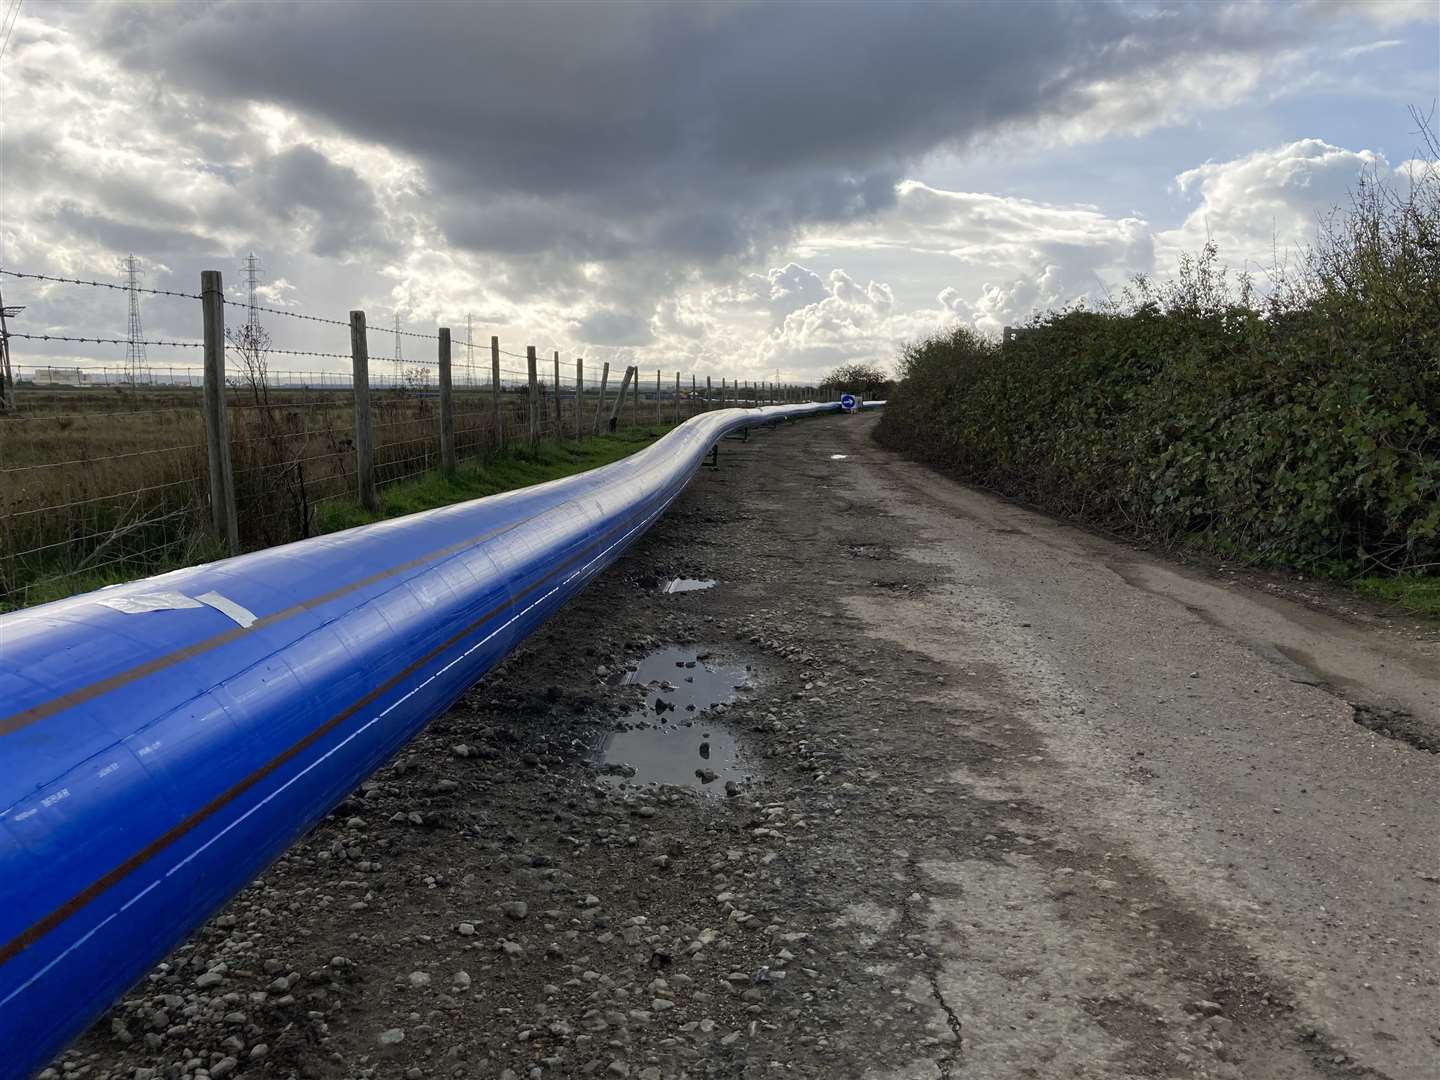 The new blue water main awaits being connected between Sheppey and the mainland